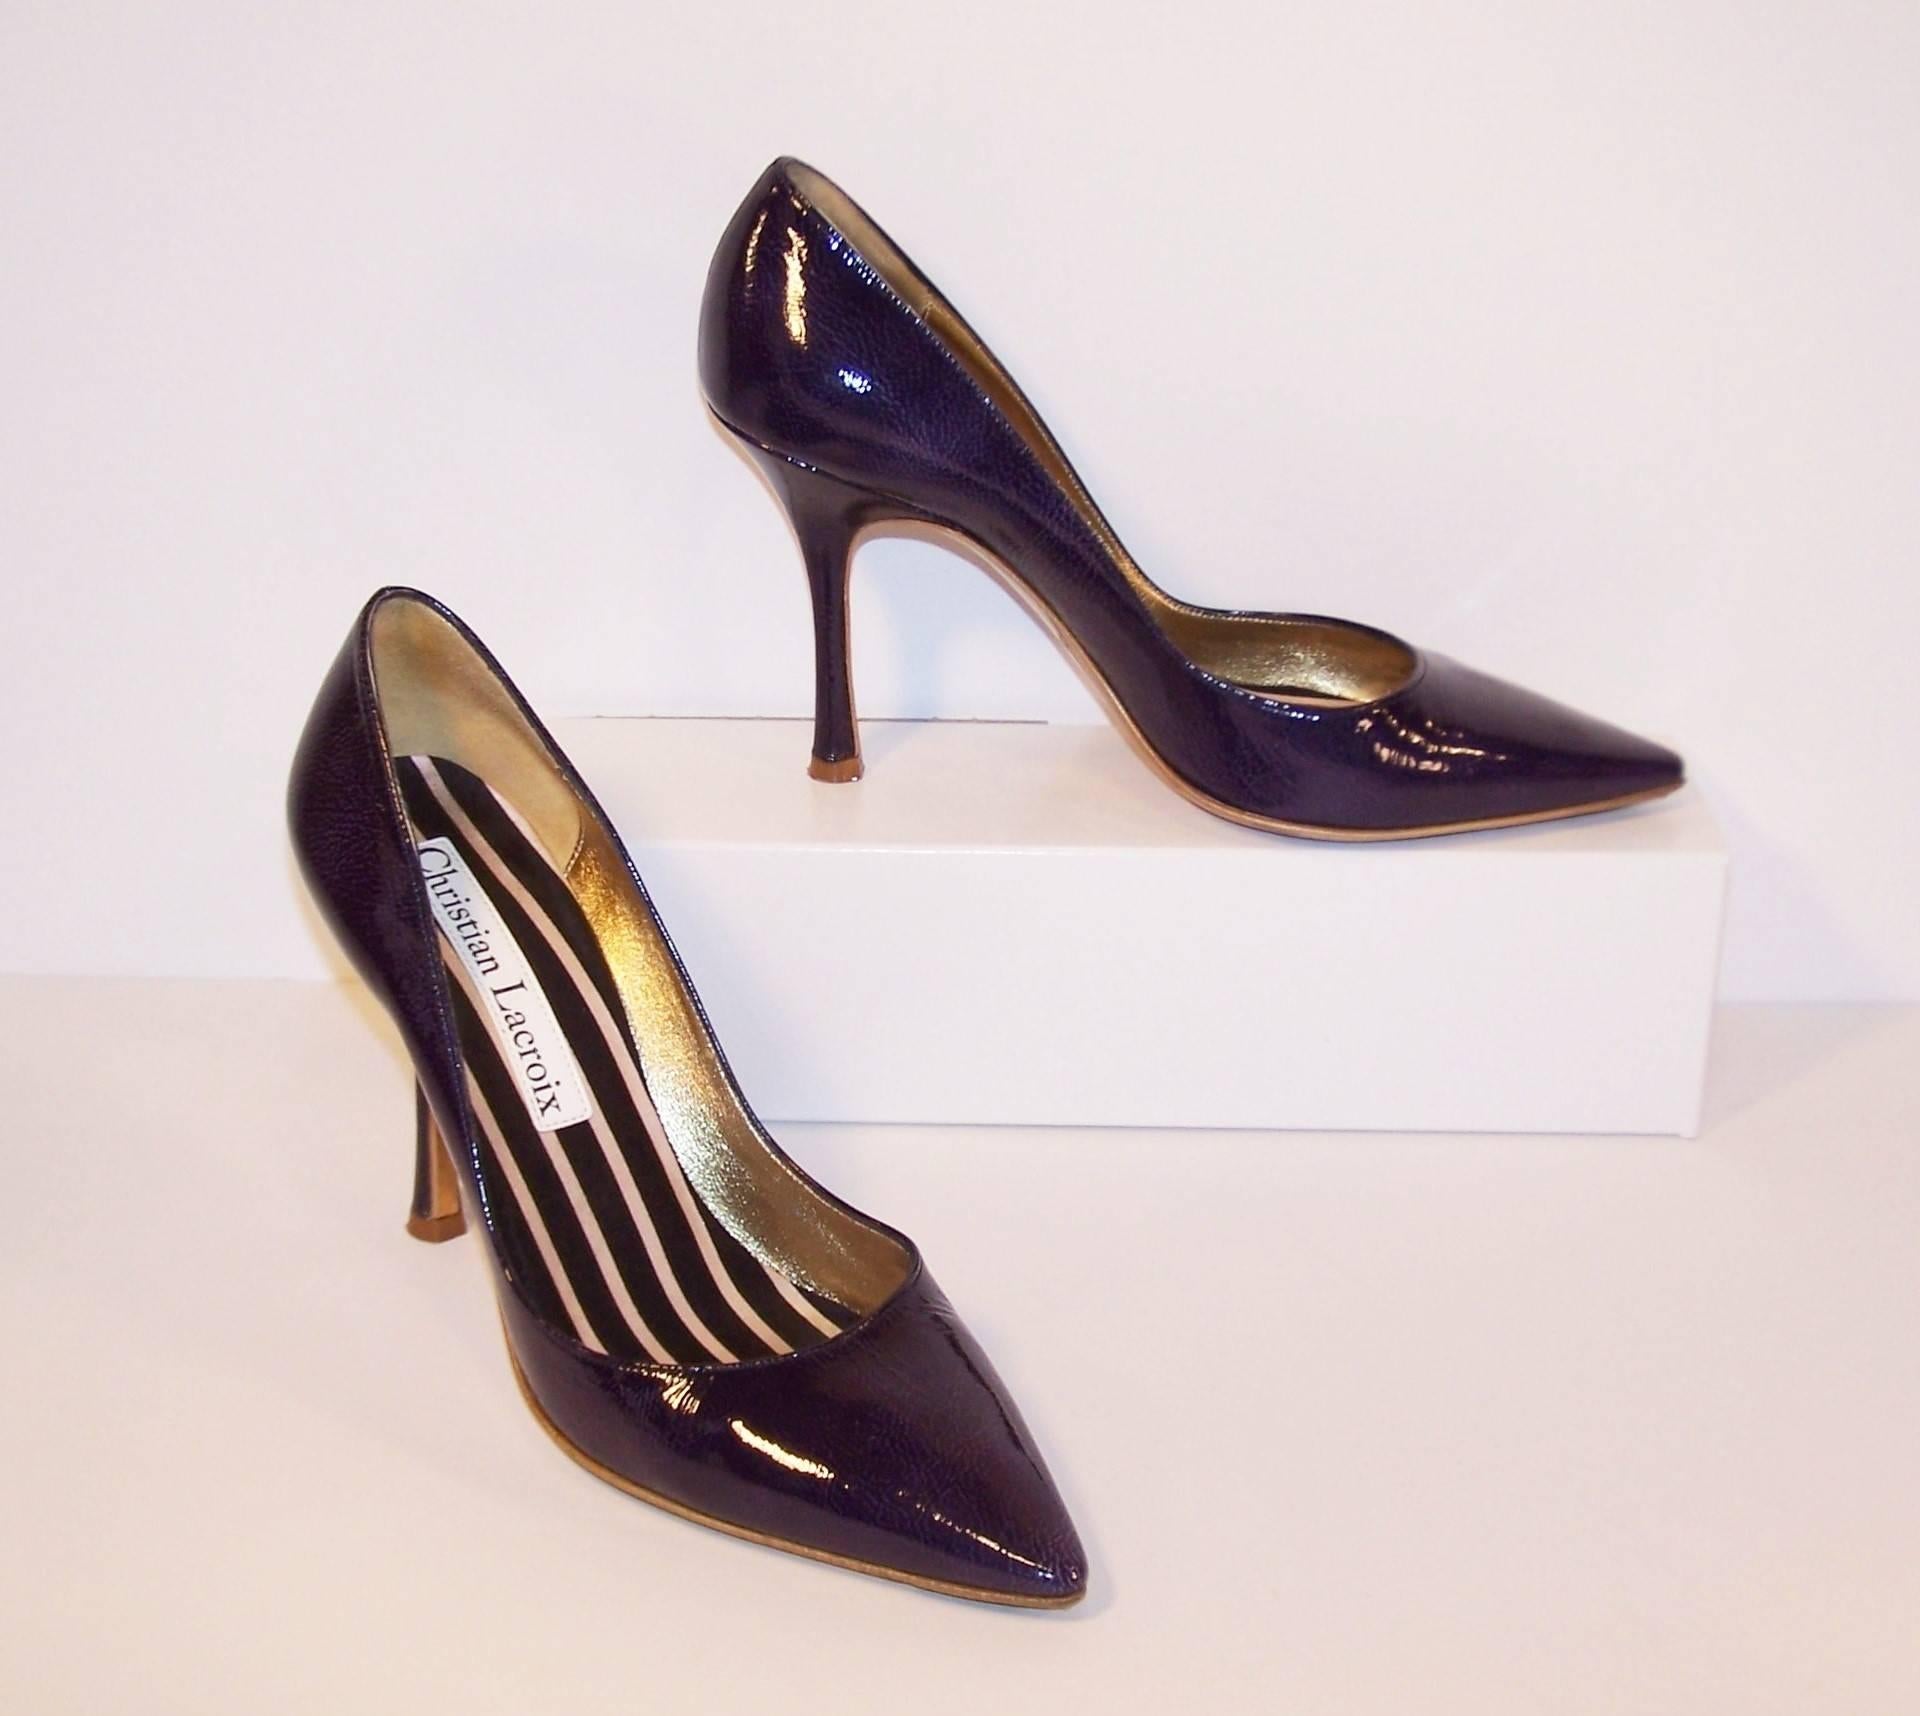 These stiletto shoes have all the classicism of a 1950's silhouette with a dash of Christian Lacroix's modern magic in the form of a unique mottled surface creating a subtle purple undertone to the blue laminated leather.  Add a striped satin foot